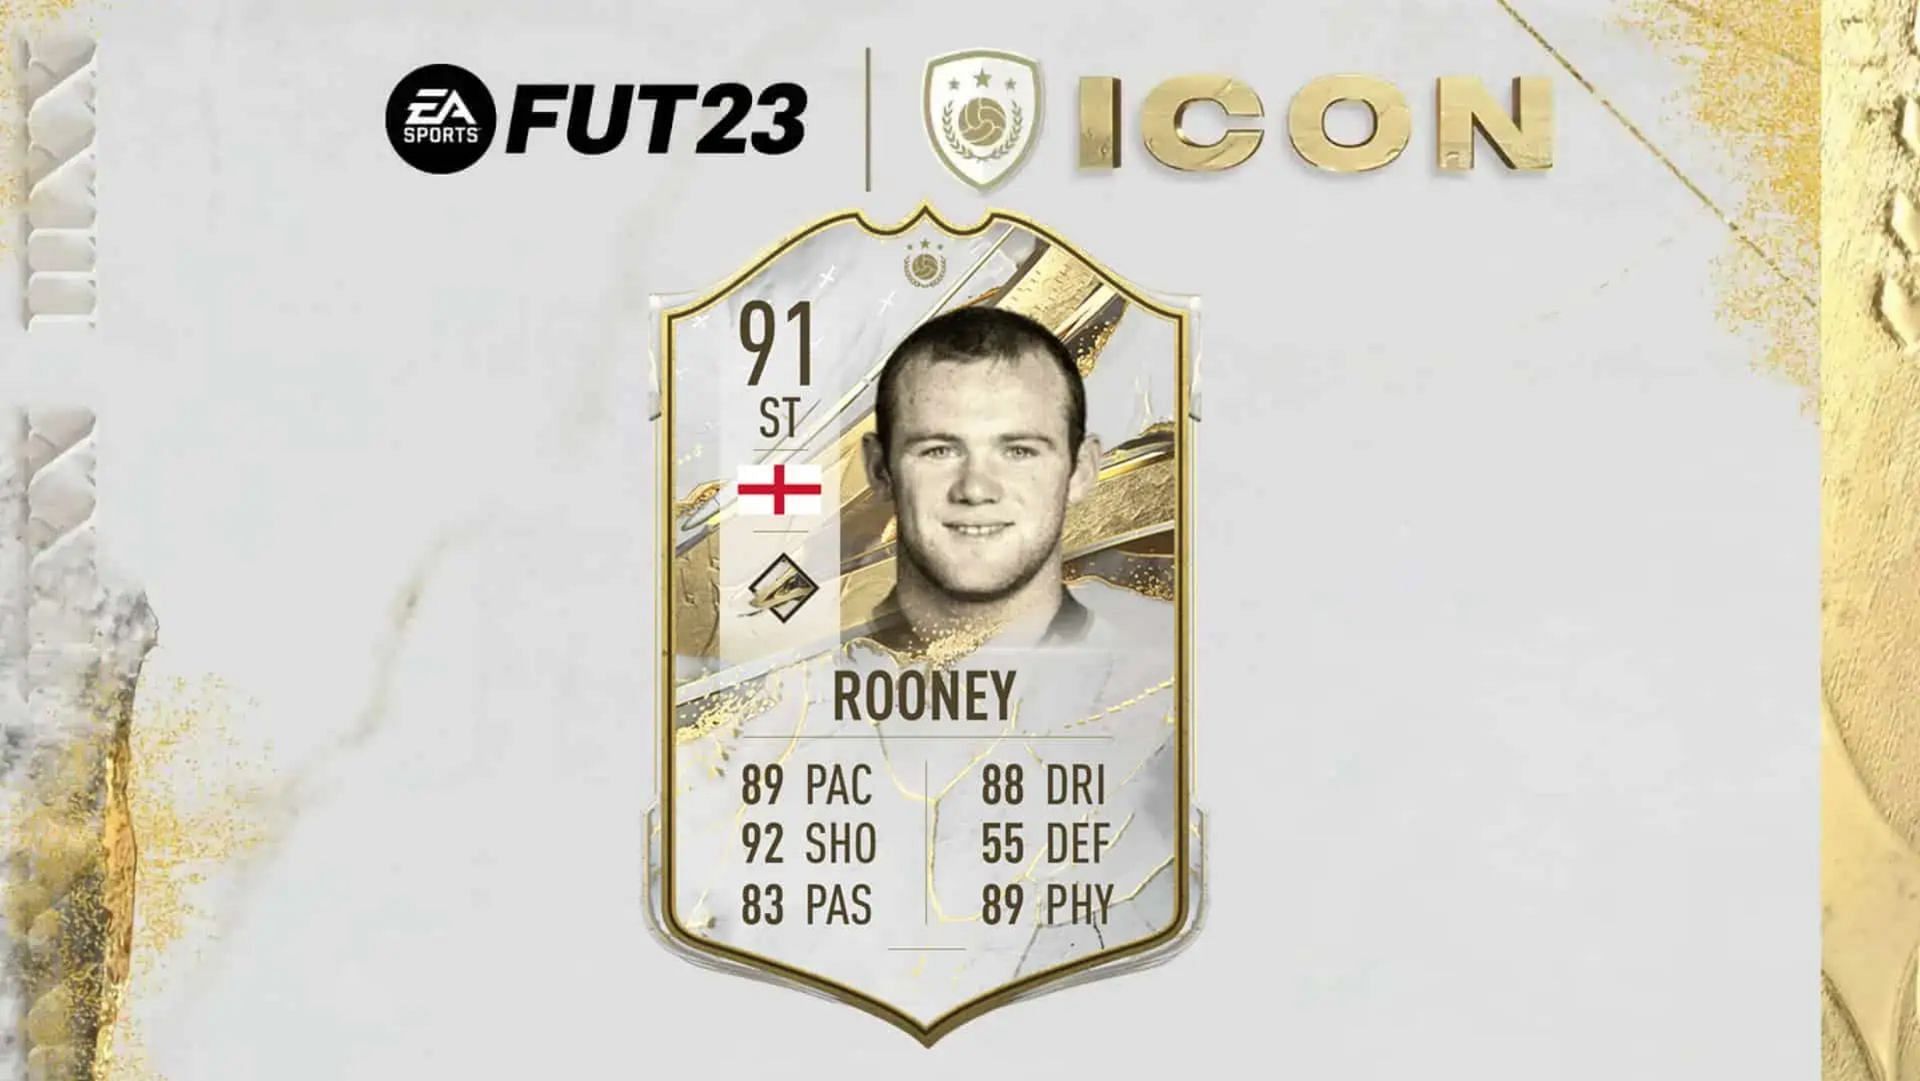 Players can now unlock Rooney